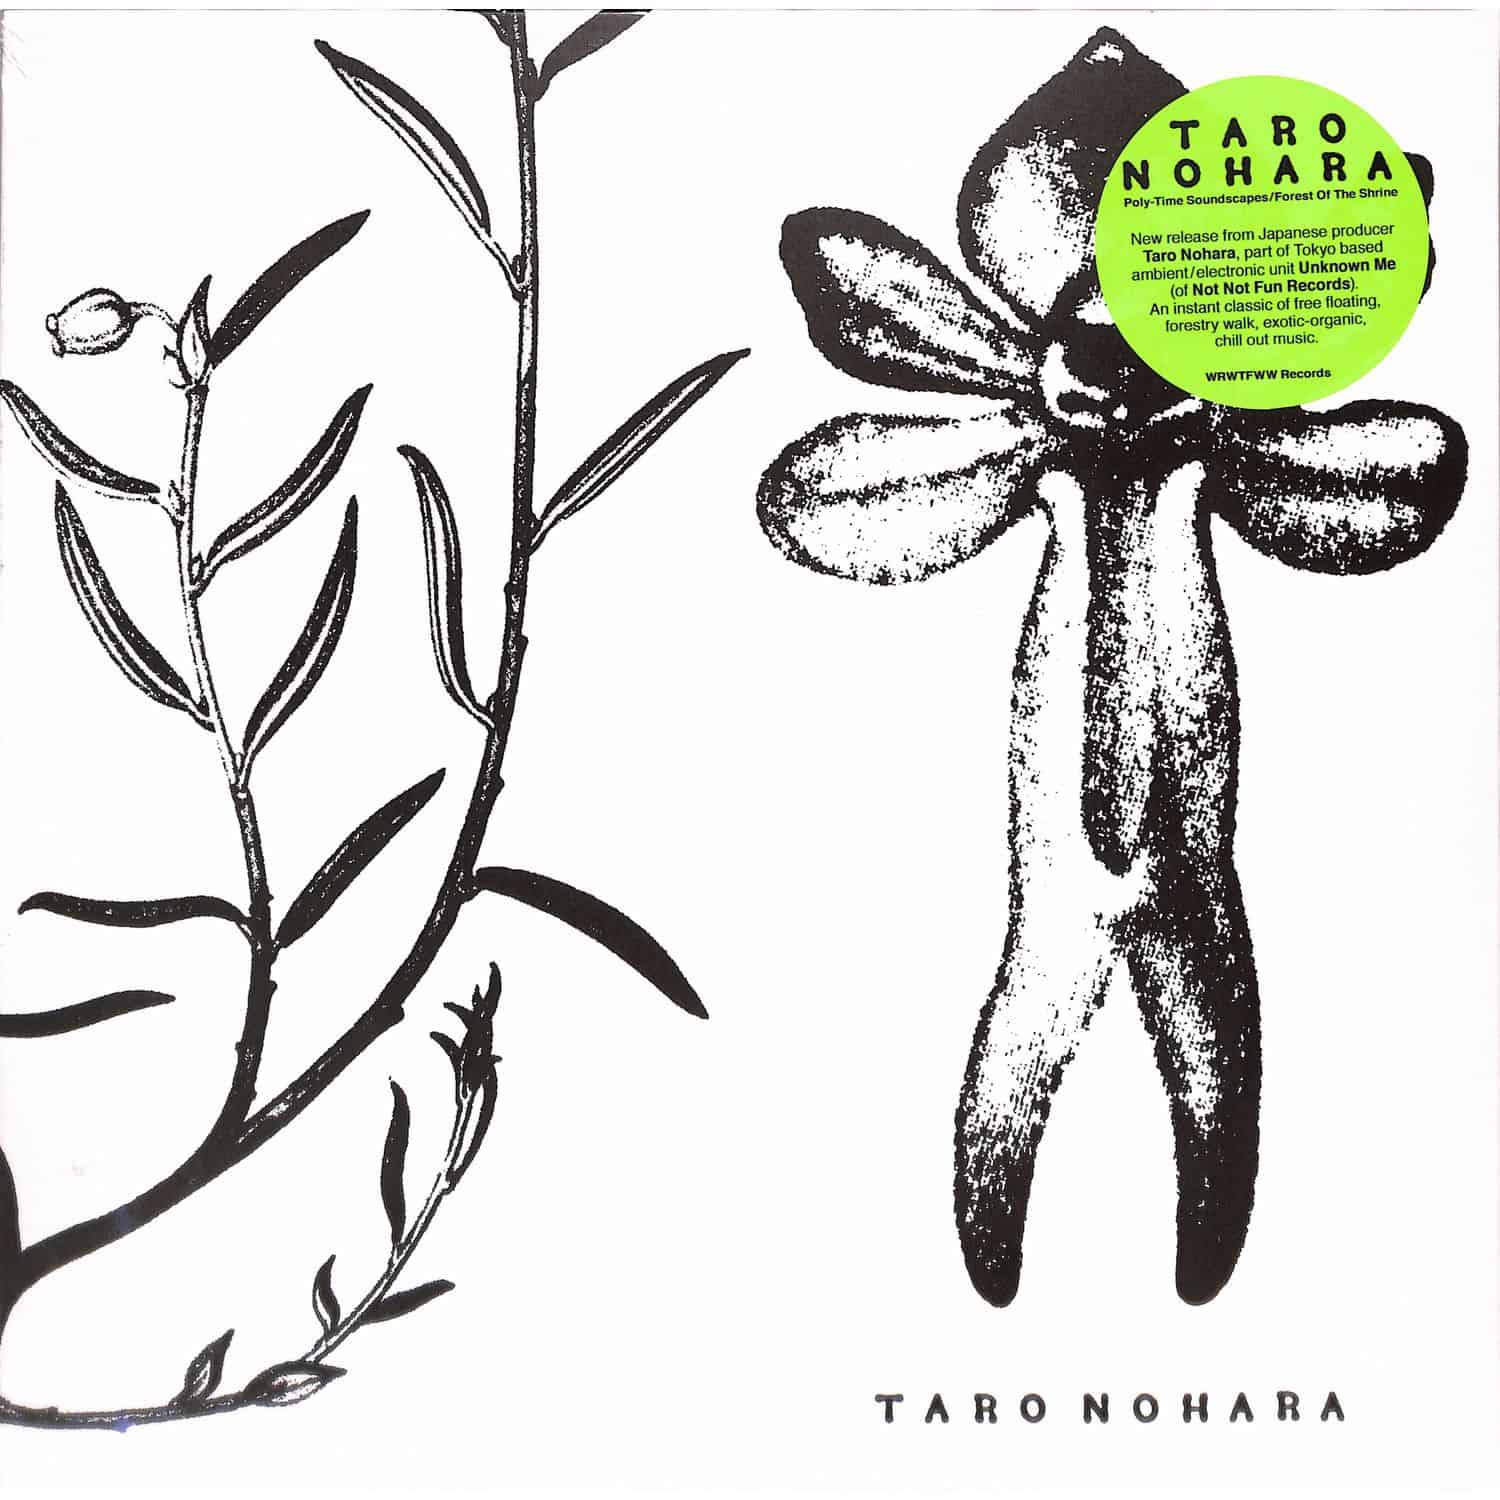 Taro Nohara - POLYTIME SOUNDSCAPES / FOREST OF THE SHRINE 